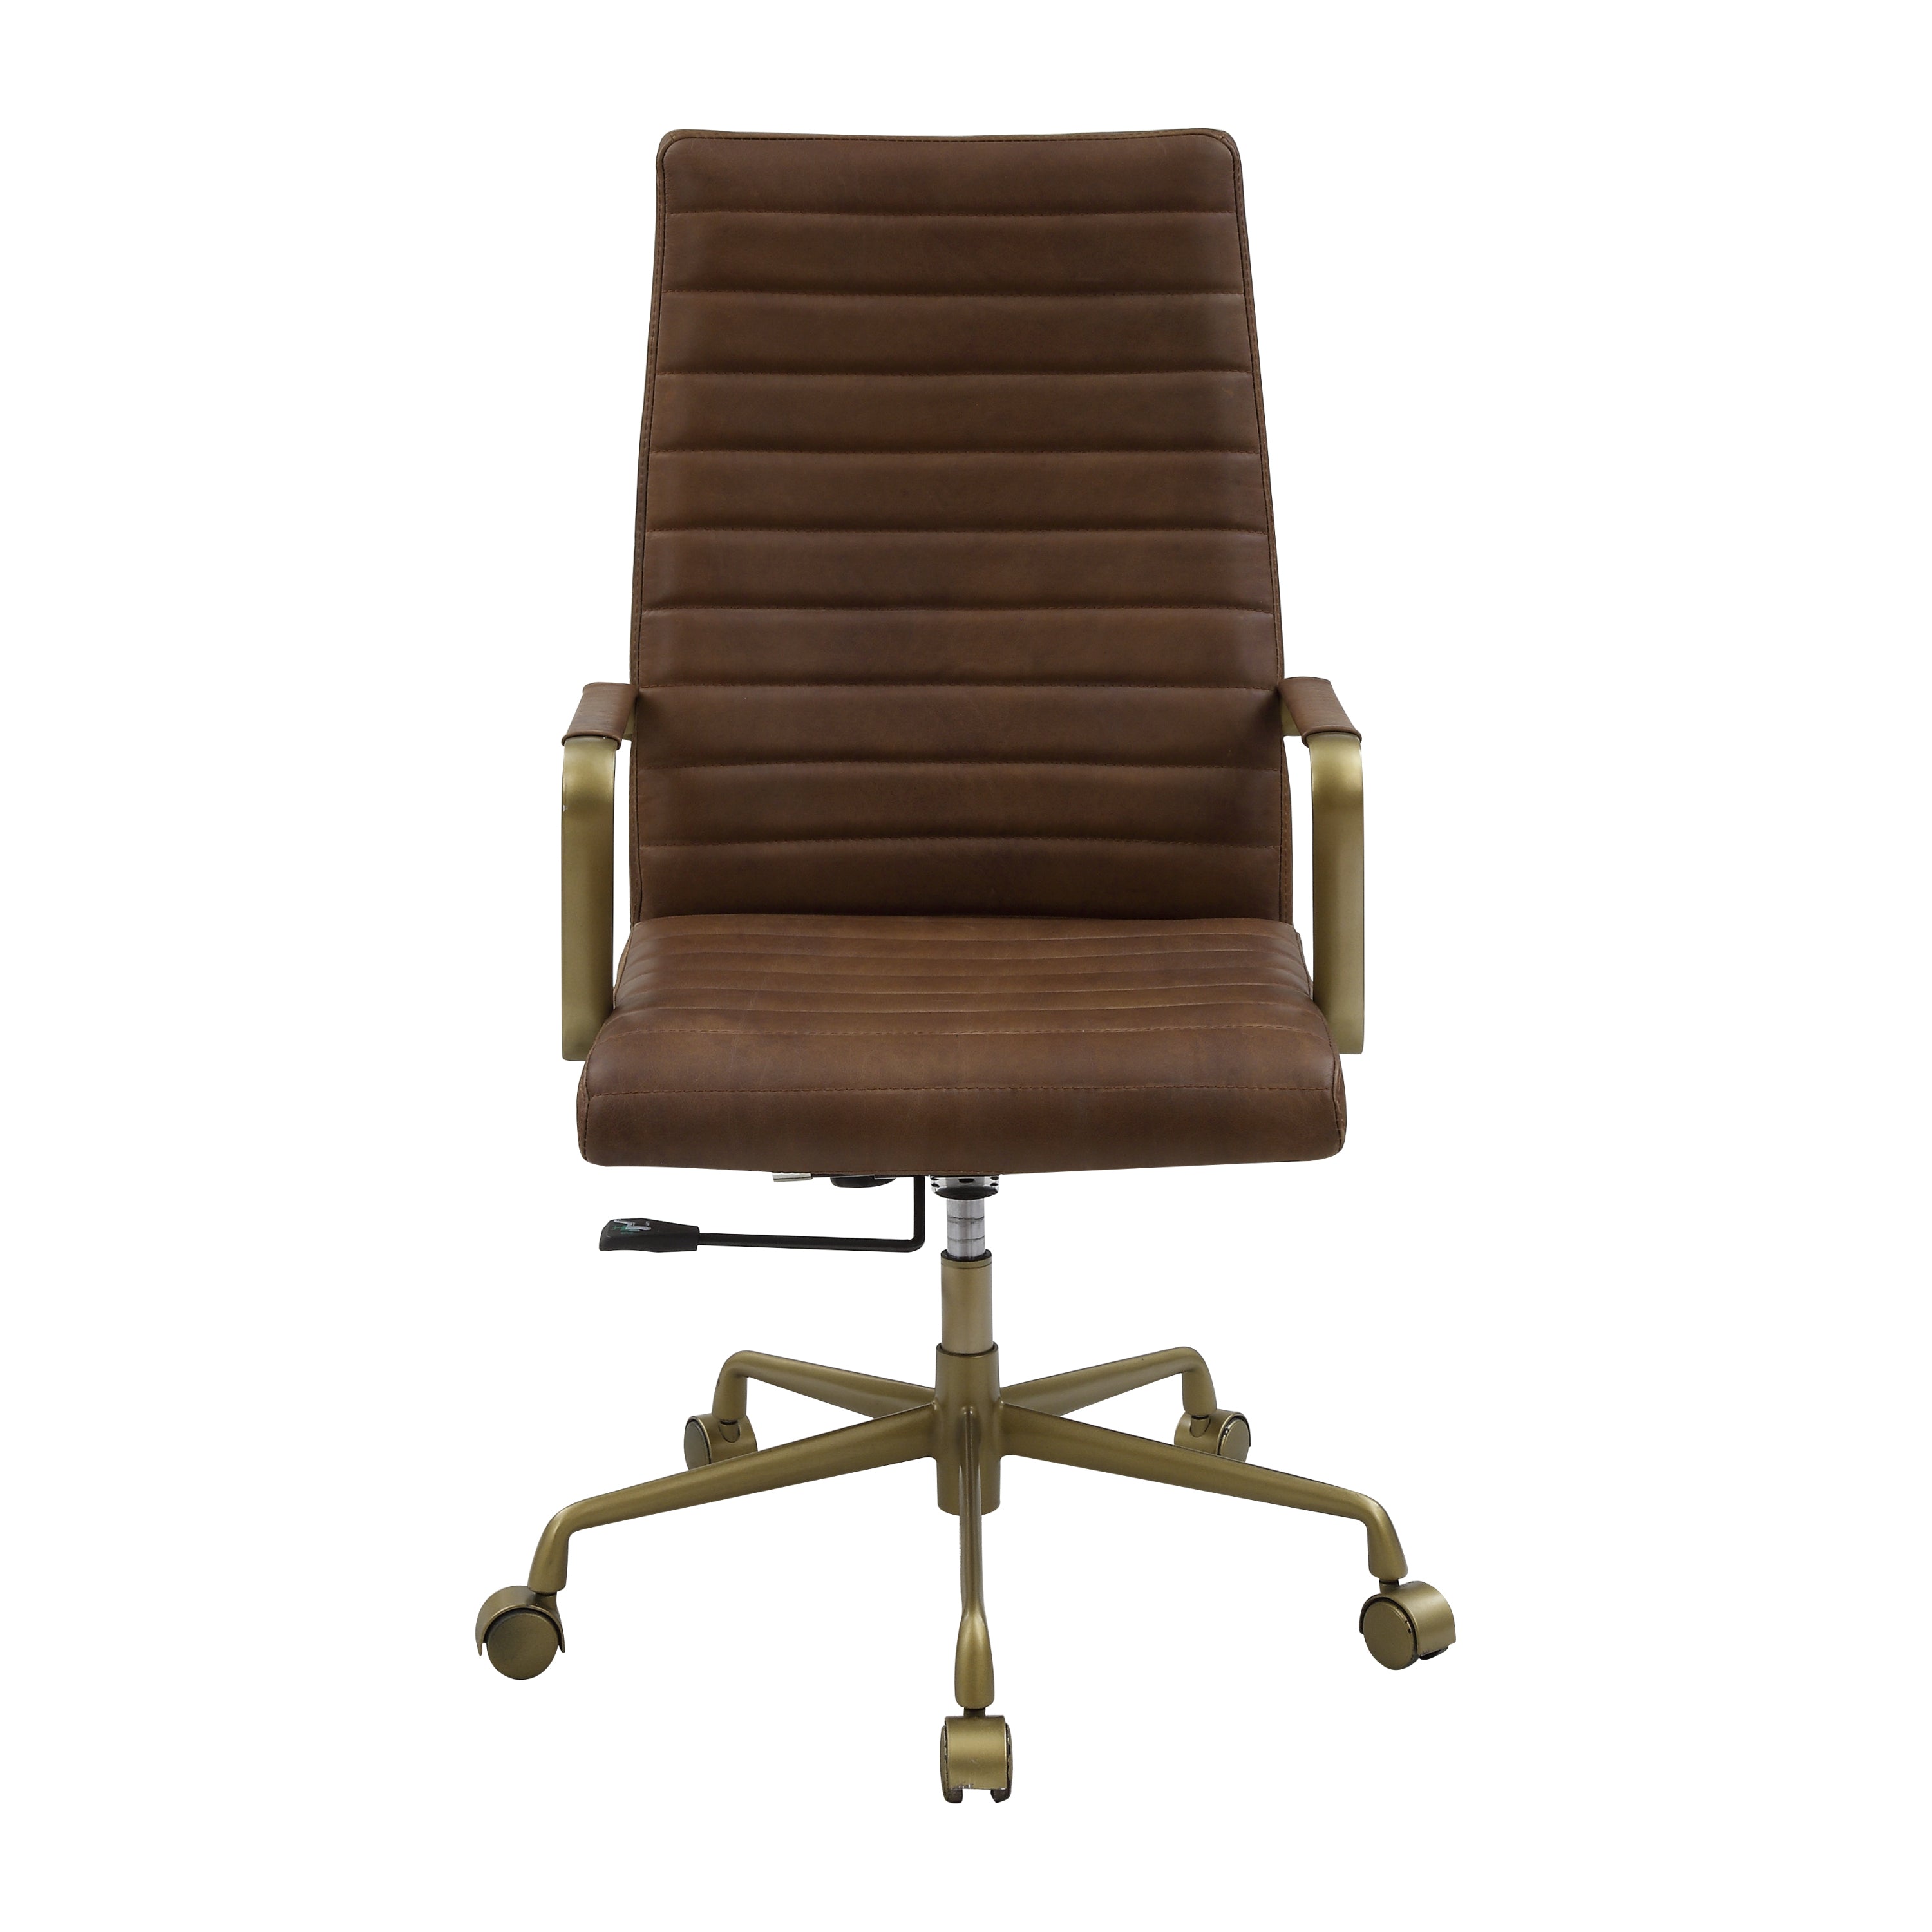 Executive Office Chair Saturn Leather - Brown